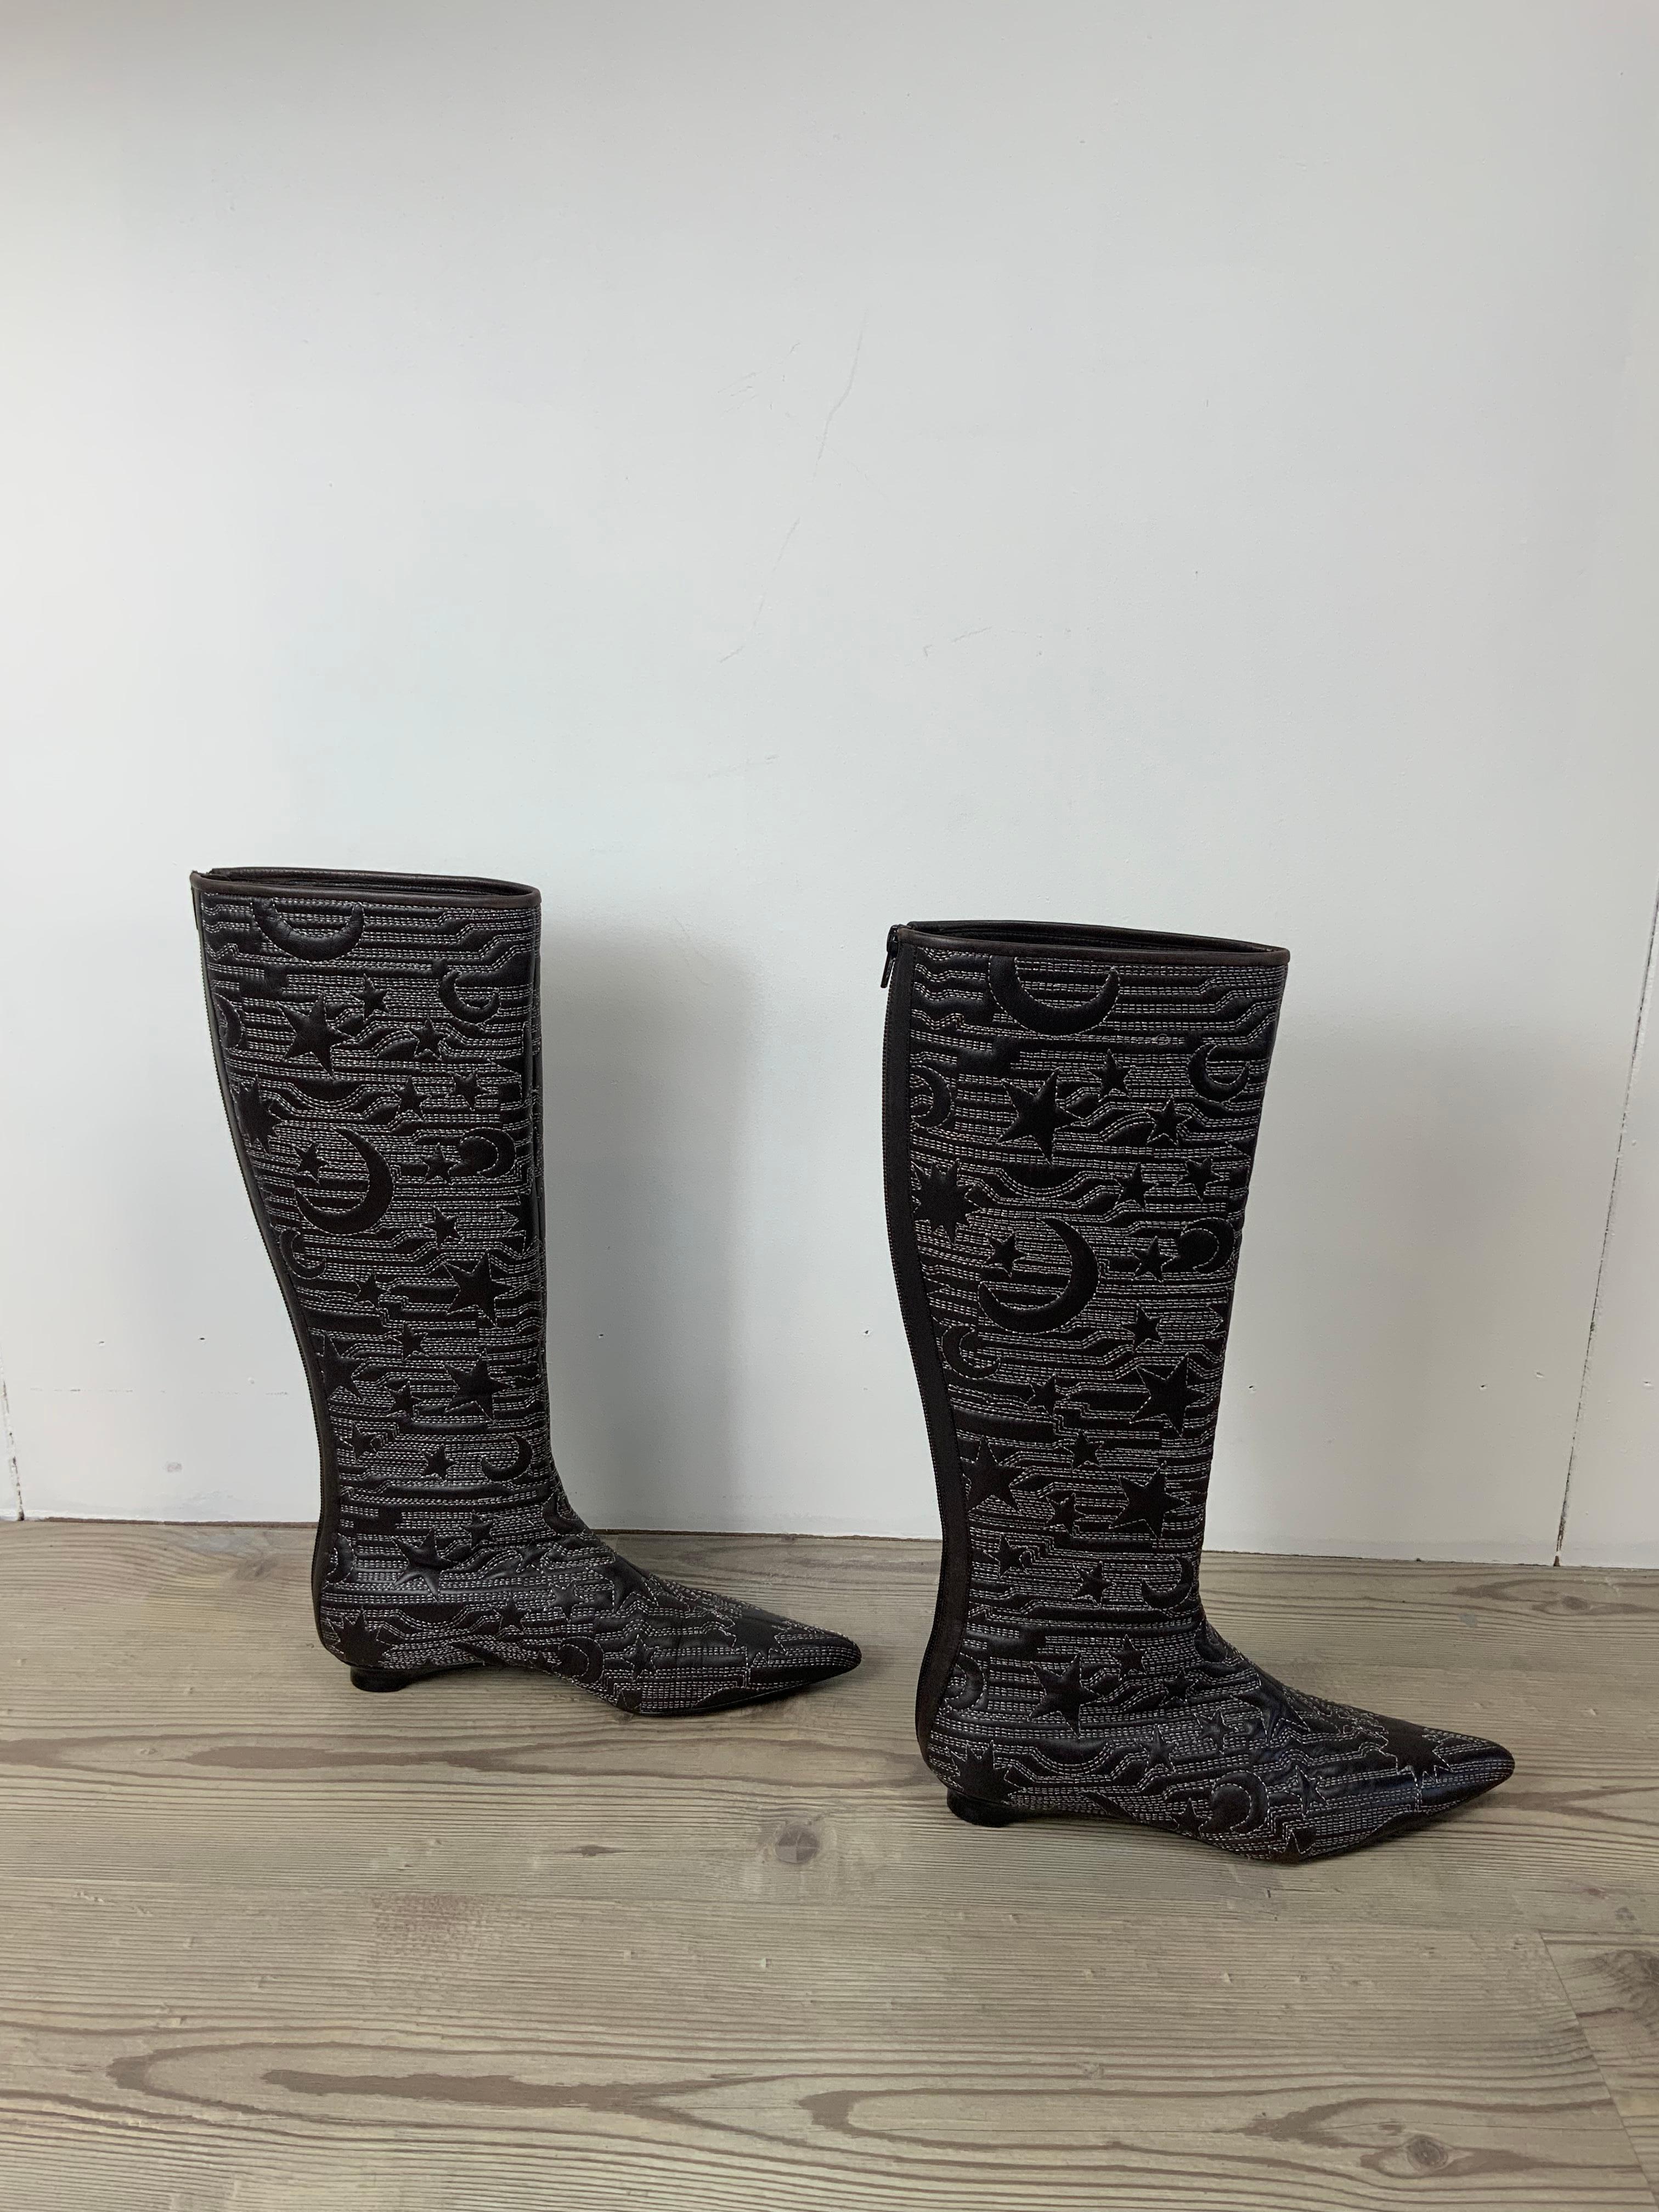 Giorgio Armani boots.
100% leather with amazing moon & stars embroidery.
Featuring zip posterior closure. The color is an in between grey and brown.
Size 39 Italian.
Measurements:
Total length 43 cm
Heels 2,5 cm
Leg circumference 43 cm
Condition: